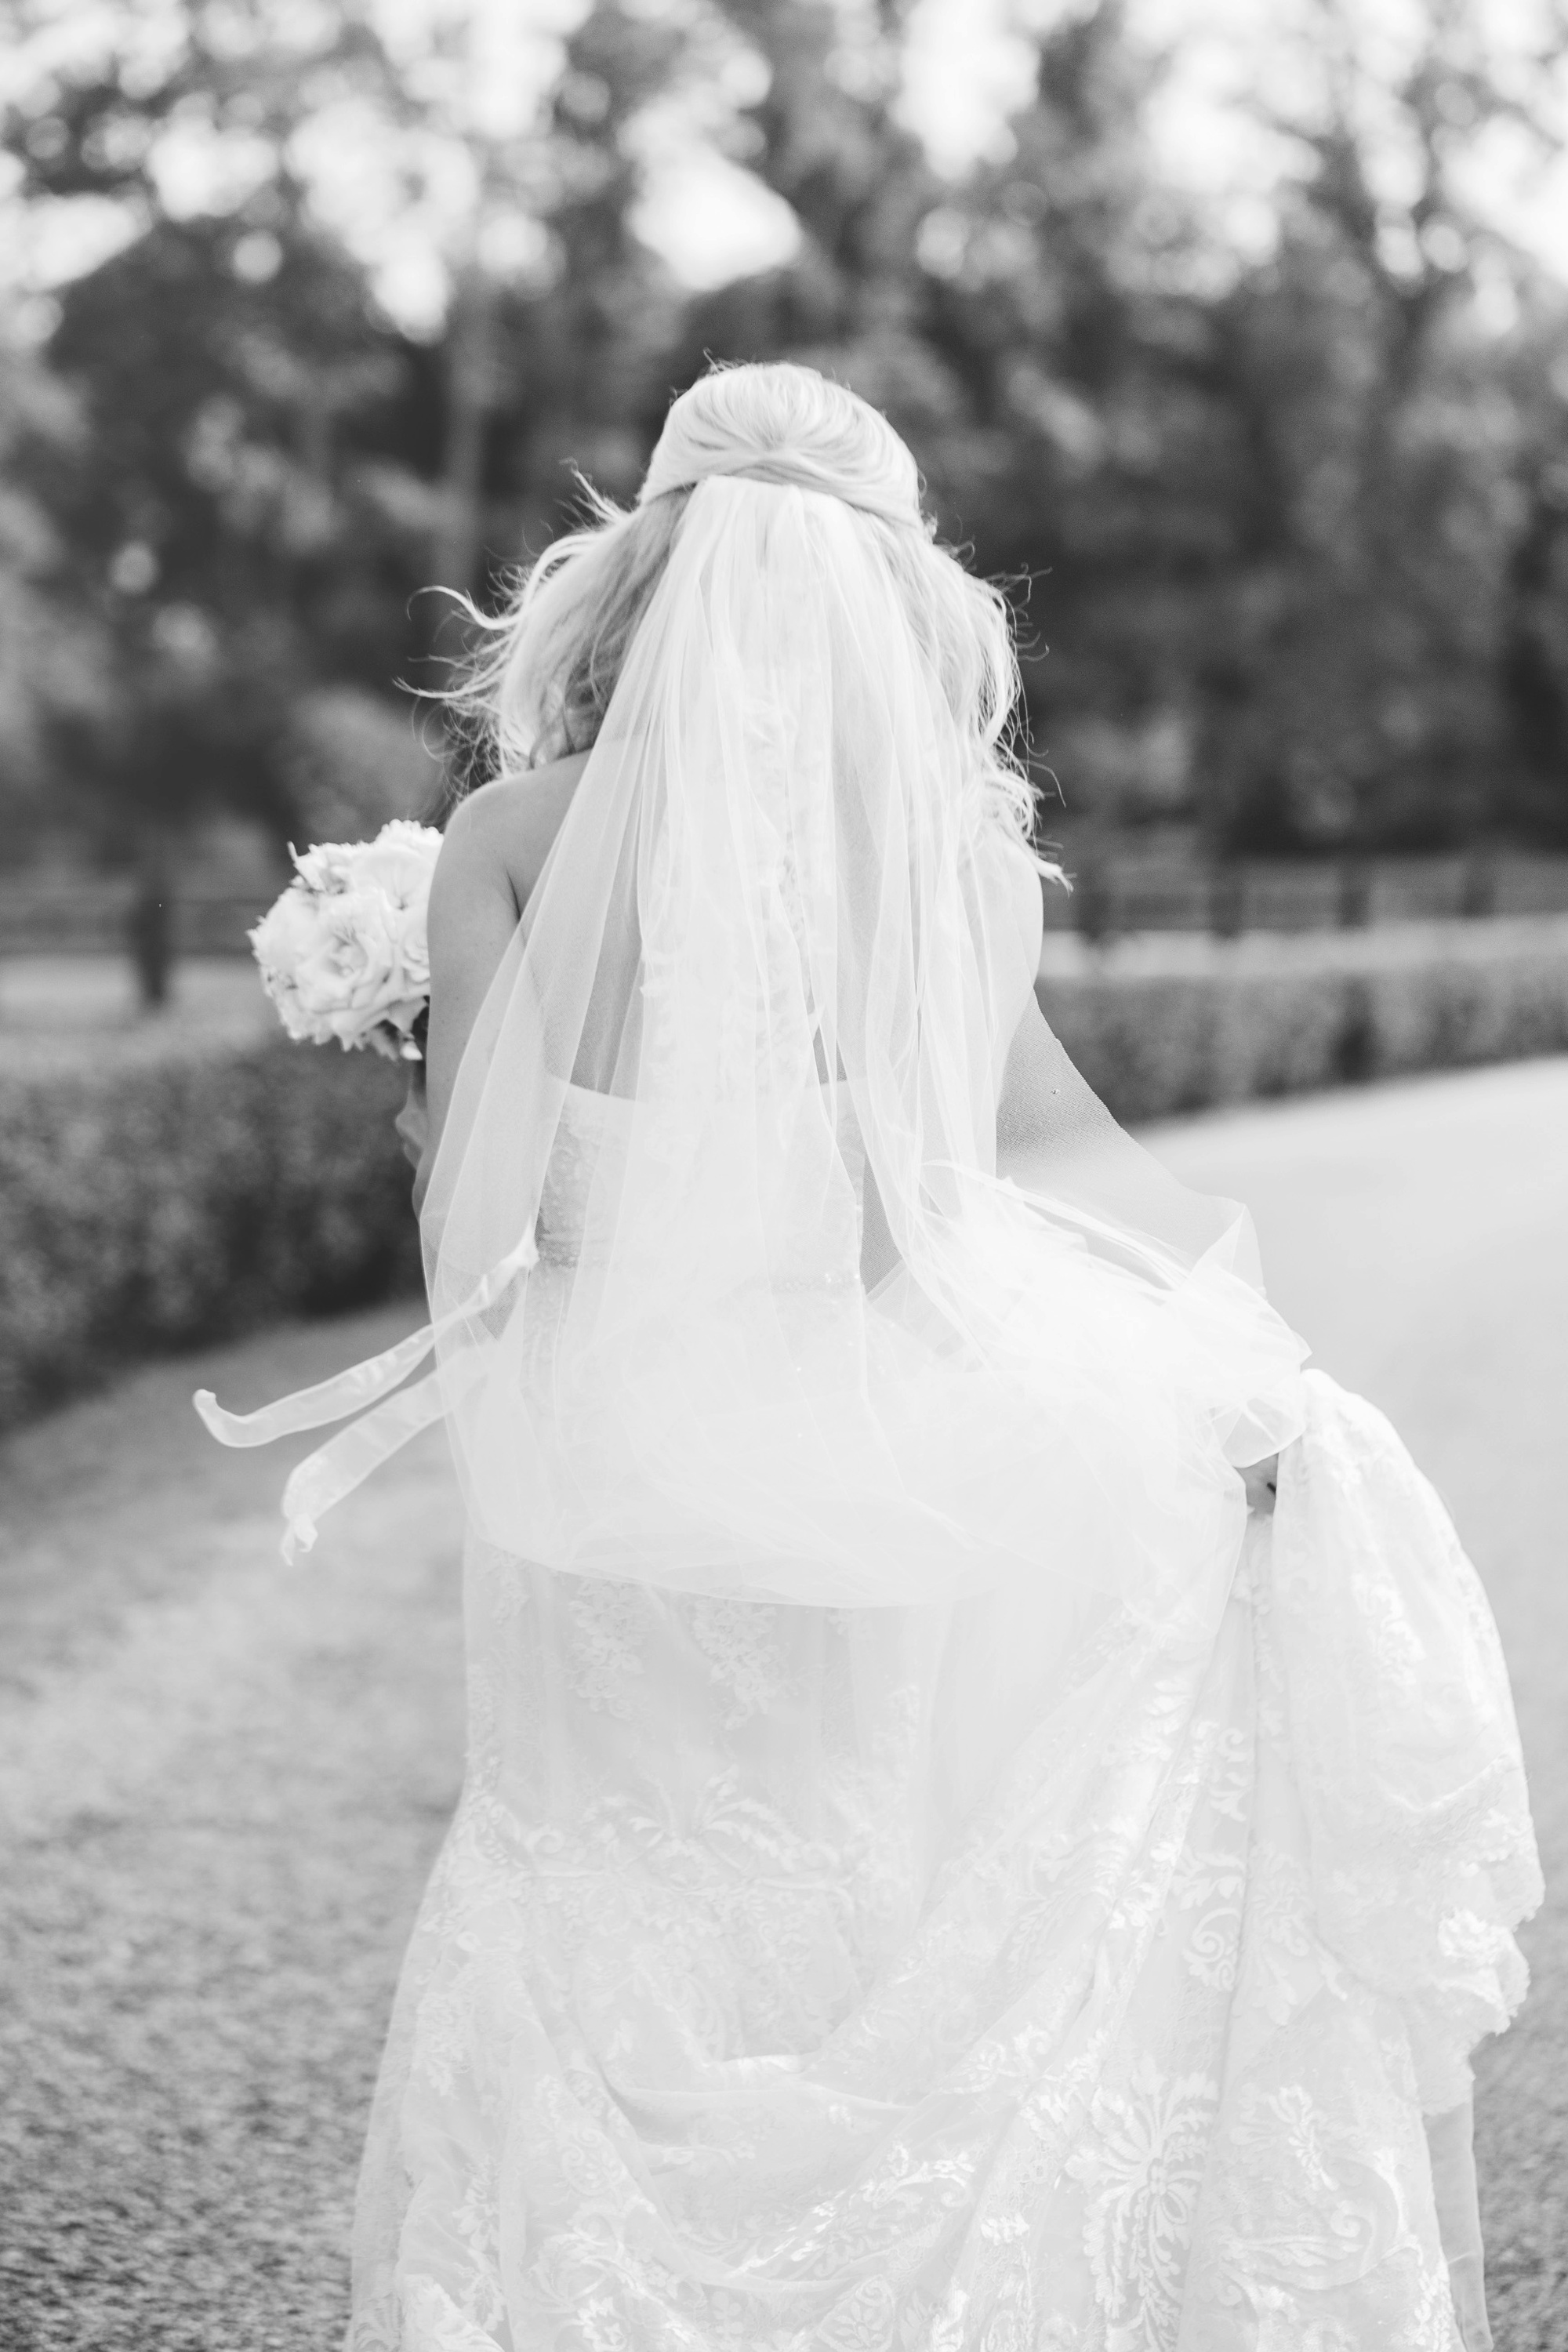 "I love photographing movement in a photograph. It helps the image come alive." says luxury destination wedding photographer Rebecca Cerasani